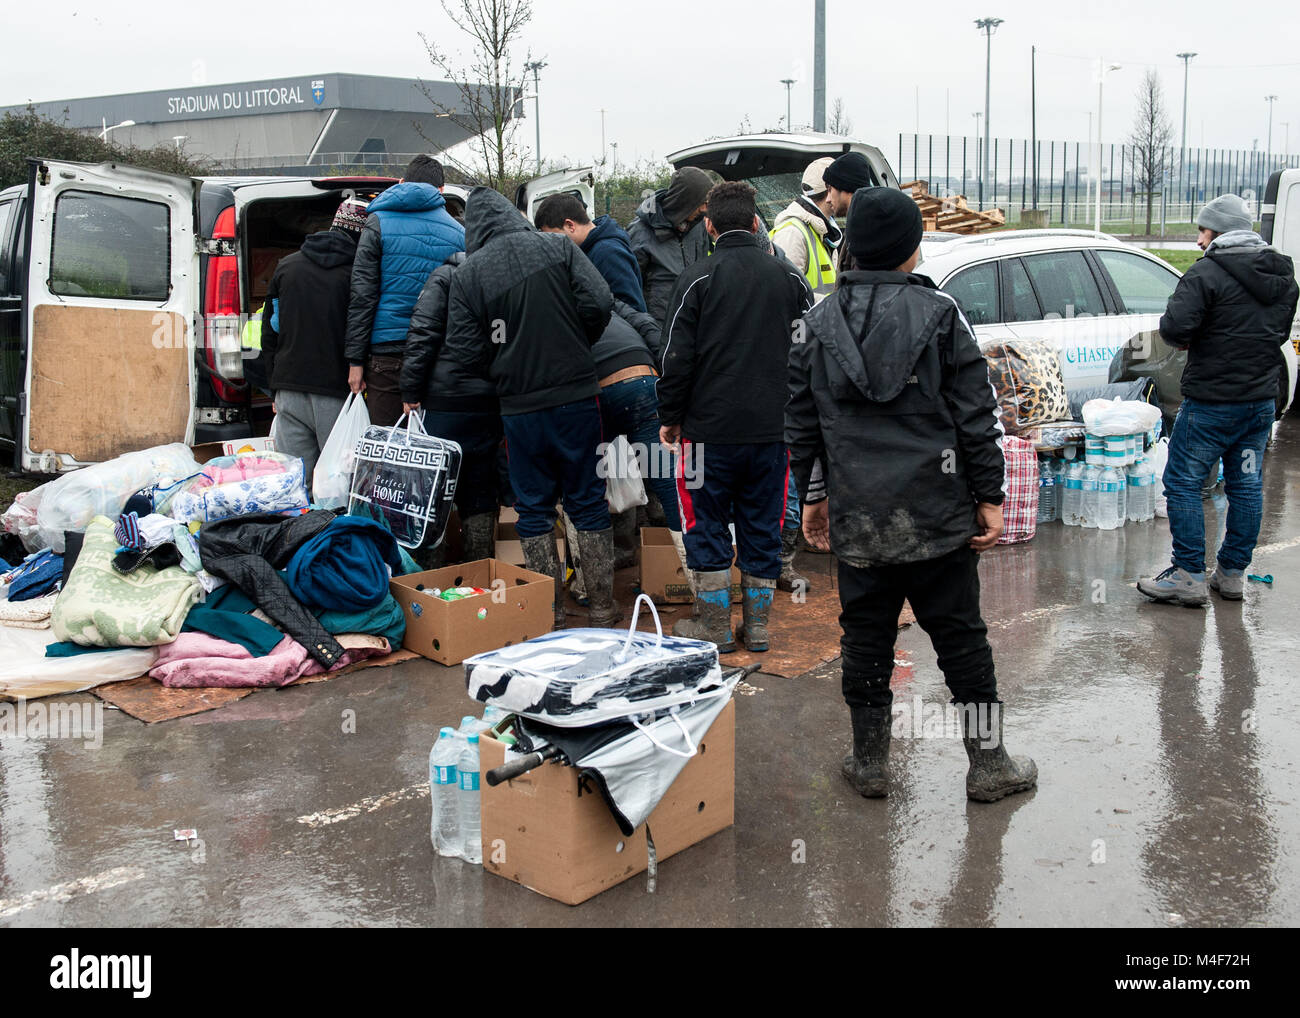 Grande-Synthe, Northern France. 31 January 2016. A delivery of aid by Belgian aid agency, Hasane is delivered and distributed to the Grande-Synthe refugee camp close to the port of Dunkirk in Northern France. In the camp conditions are grim in part due to thick mud and a lack of basic amenities. Families live in rain soaked tents and huddle around small fires for basic heat. Stock Photo